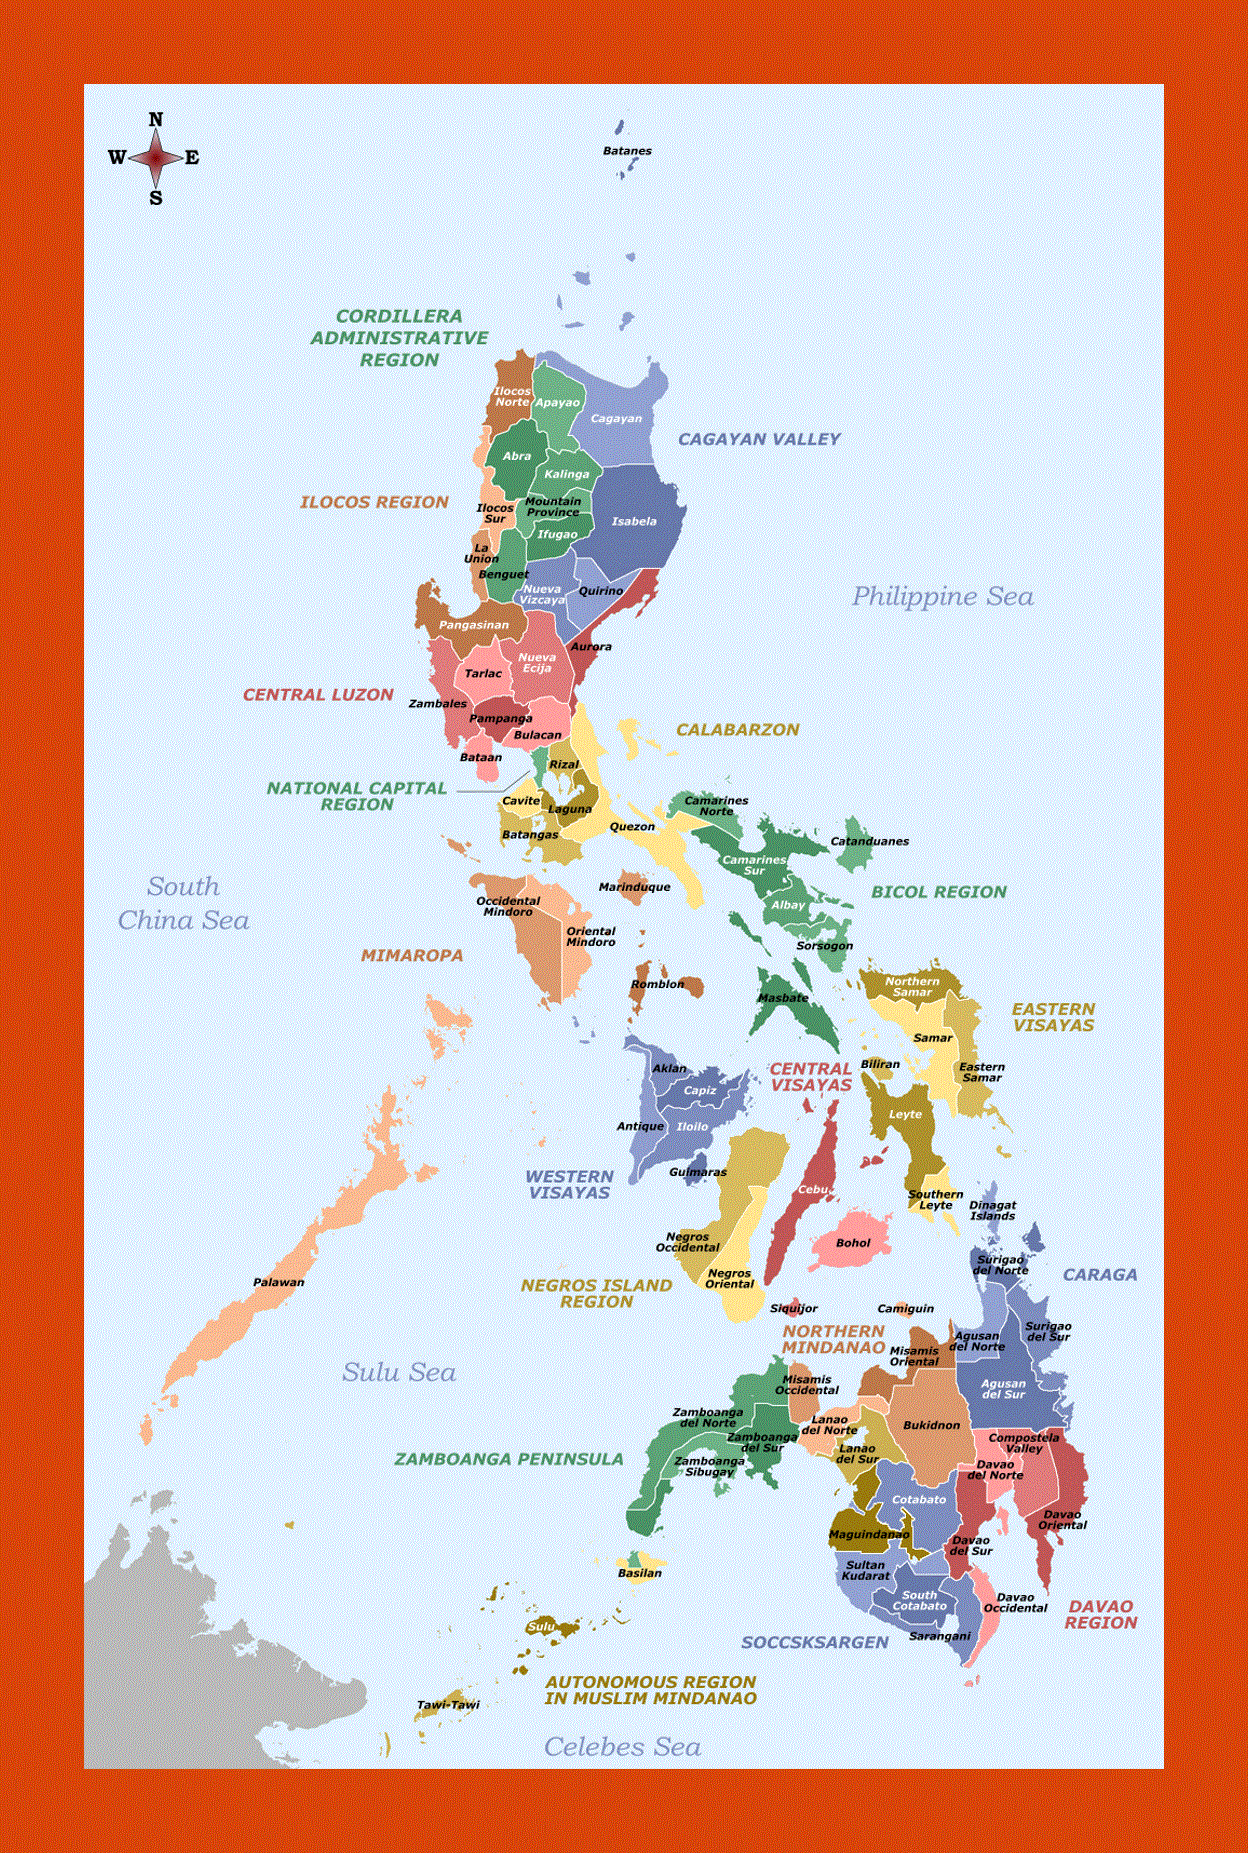 Provinces and regions map of Philippines